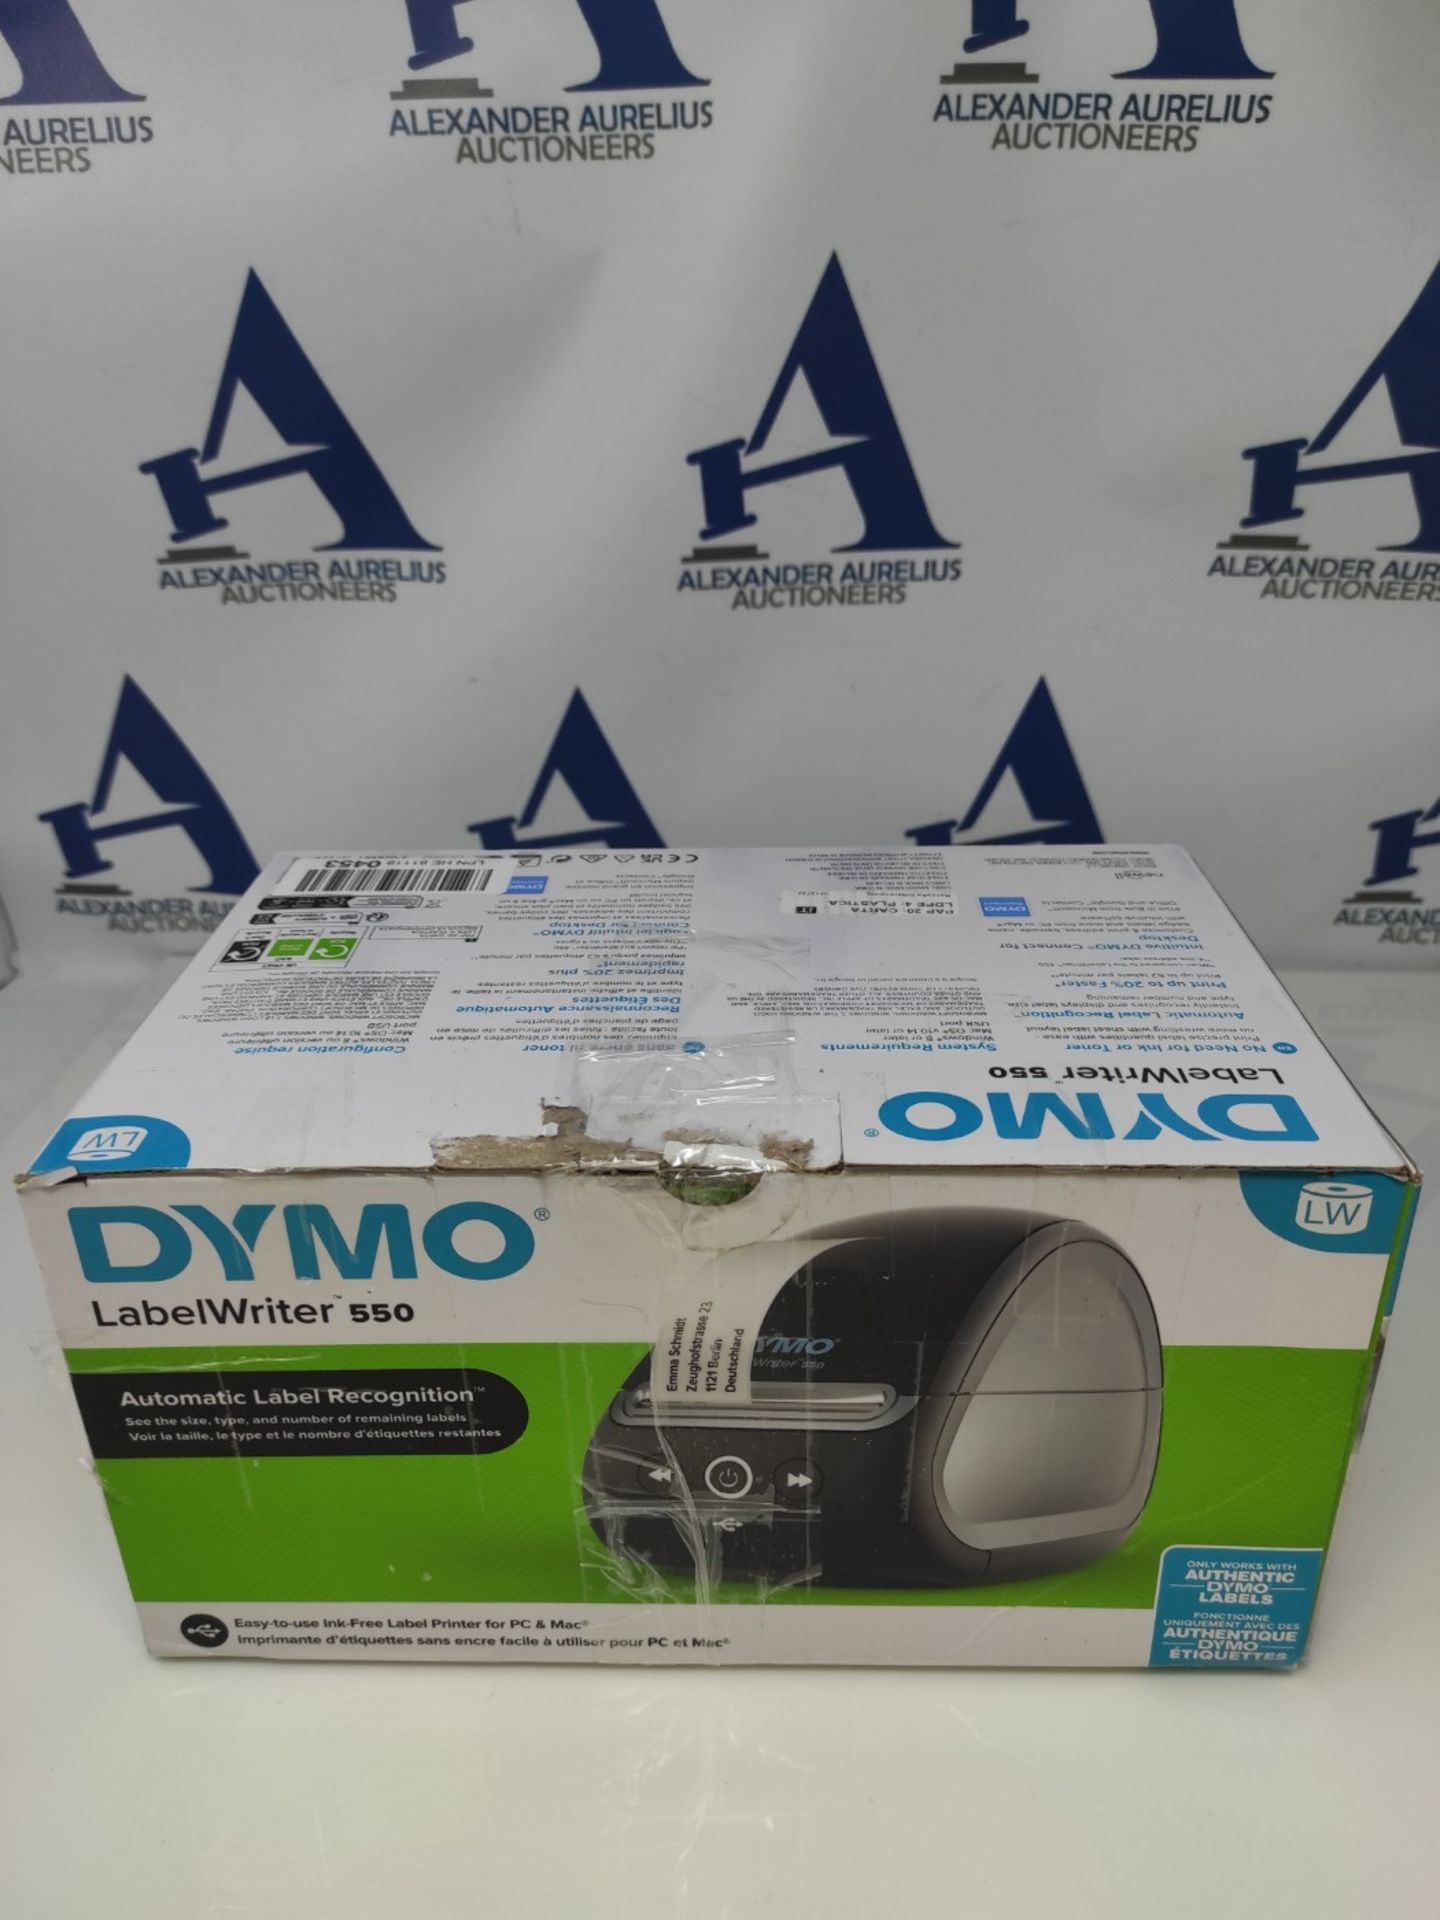 RRP £113.00 DYMO LabelWriter 550 label printer | Labeler with direct thermal printing | Automatic - Image 2 of 3